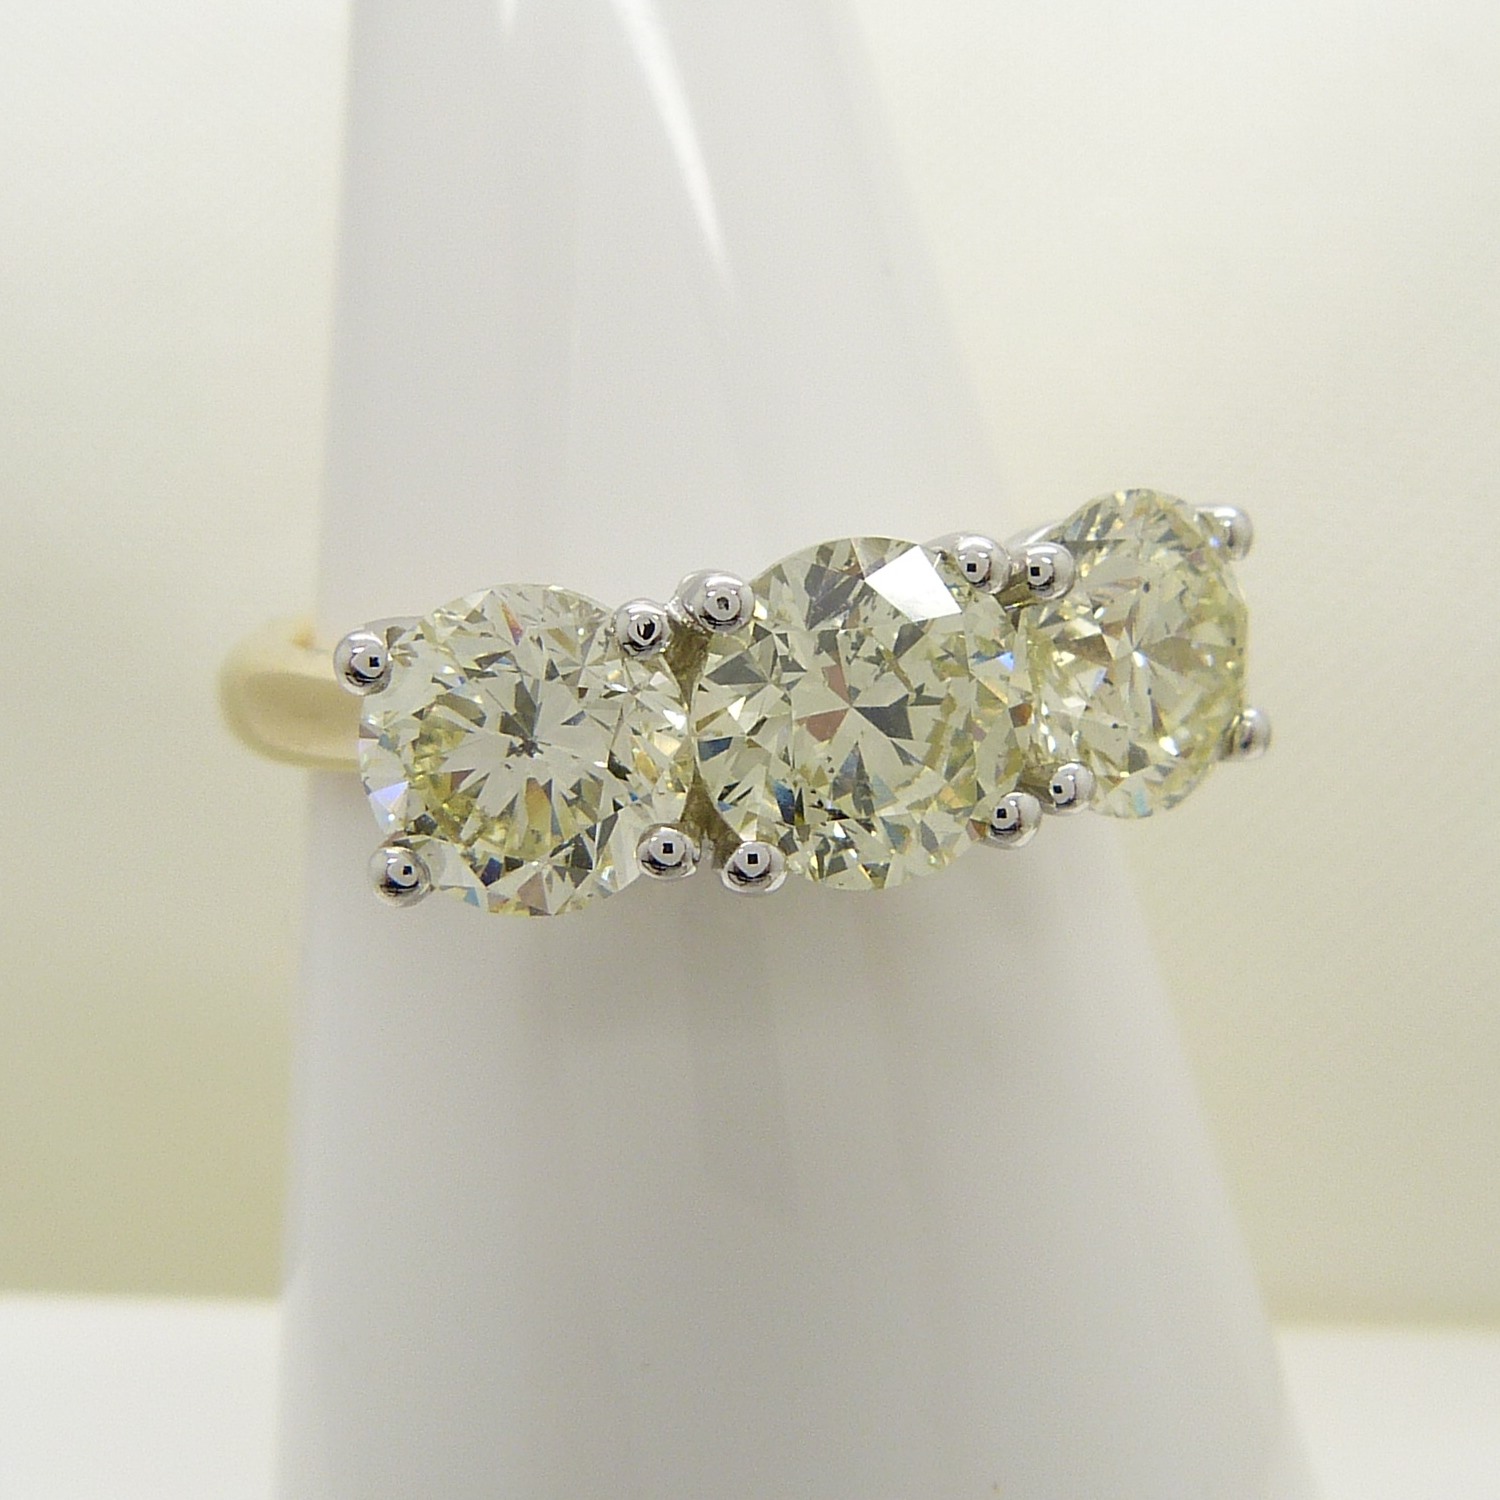 A stunning WGI certificated 3.11 carat diamond 3-stone ring in 18ct yellow and white gold - Image 7 of 8